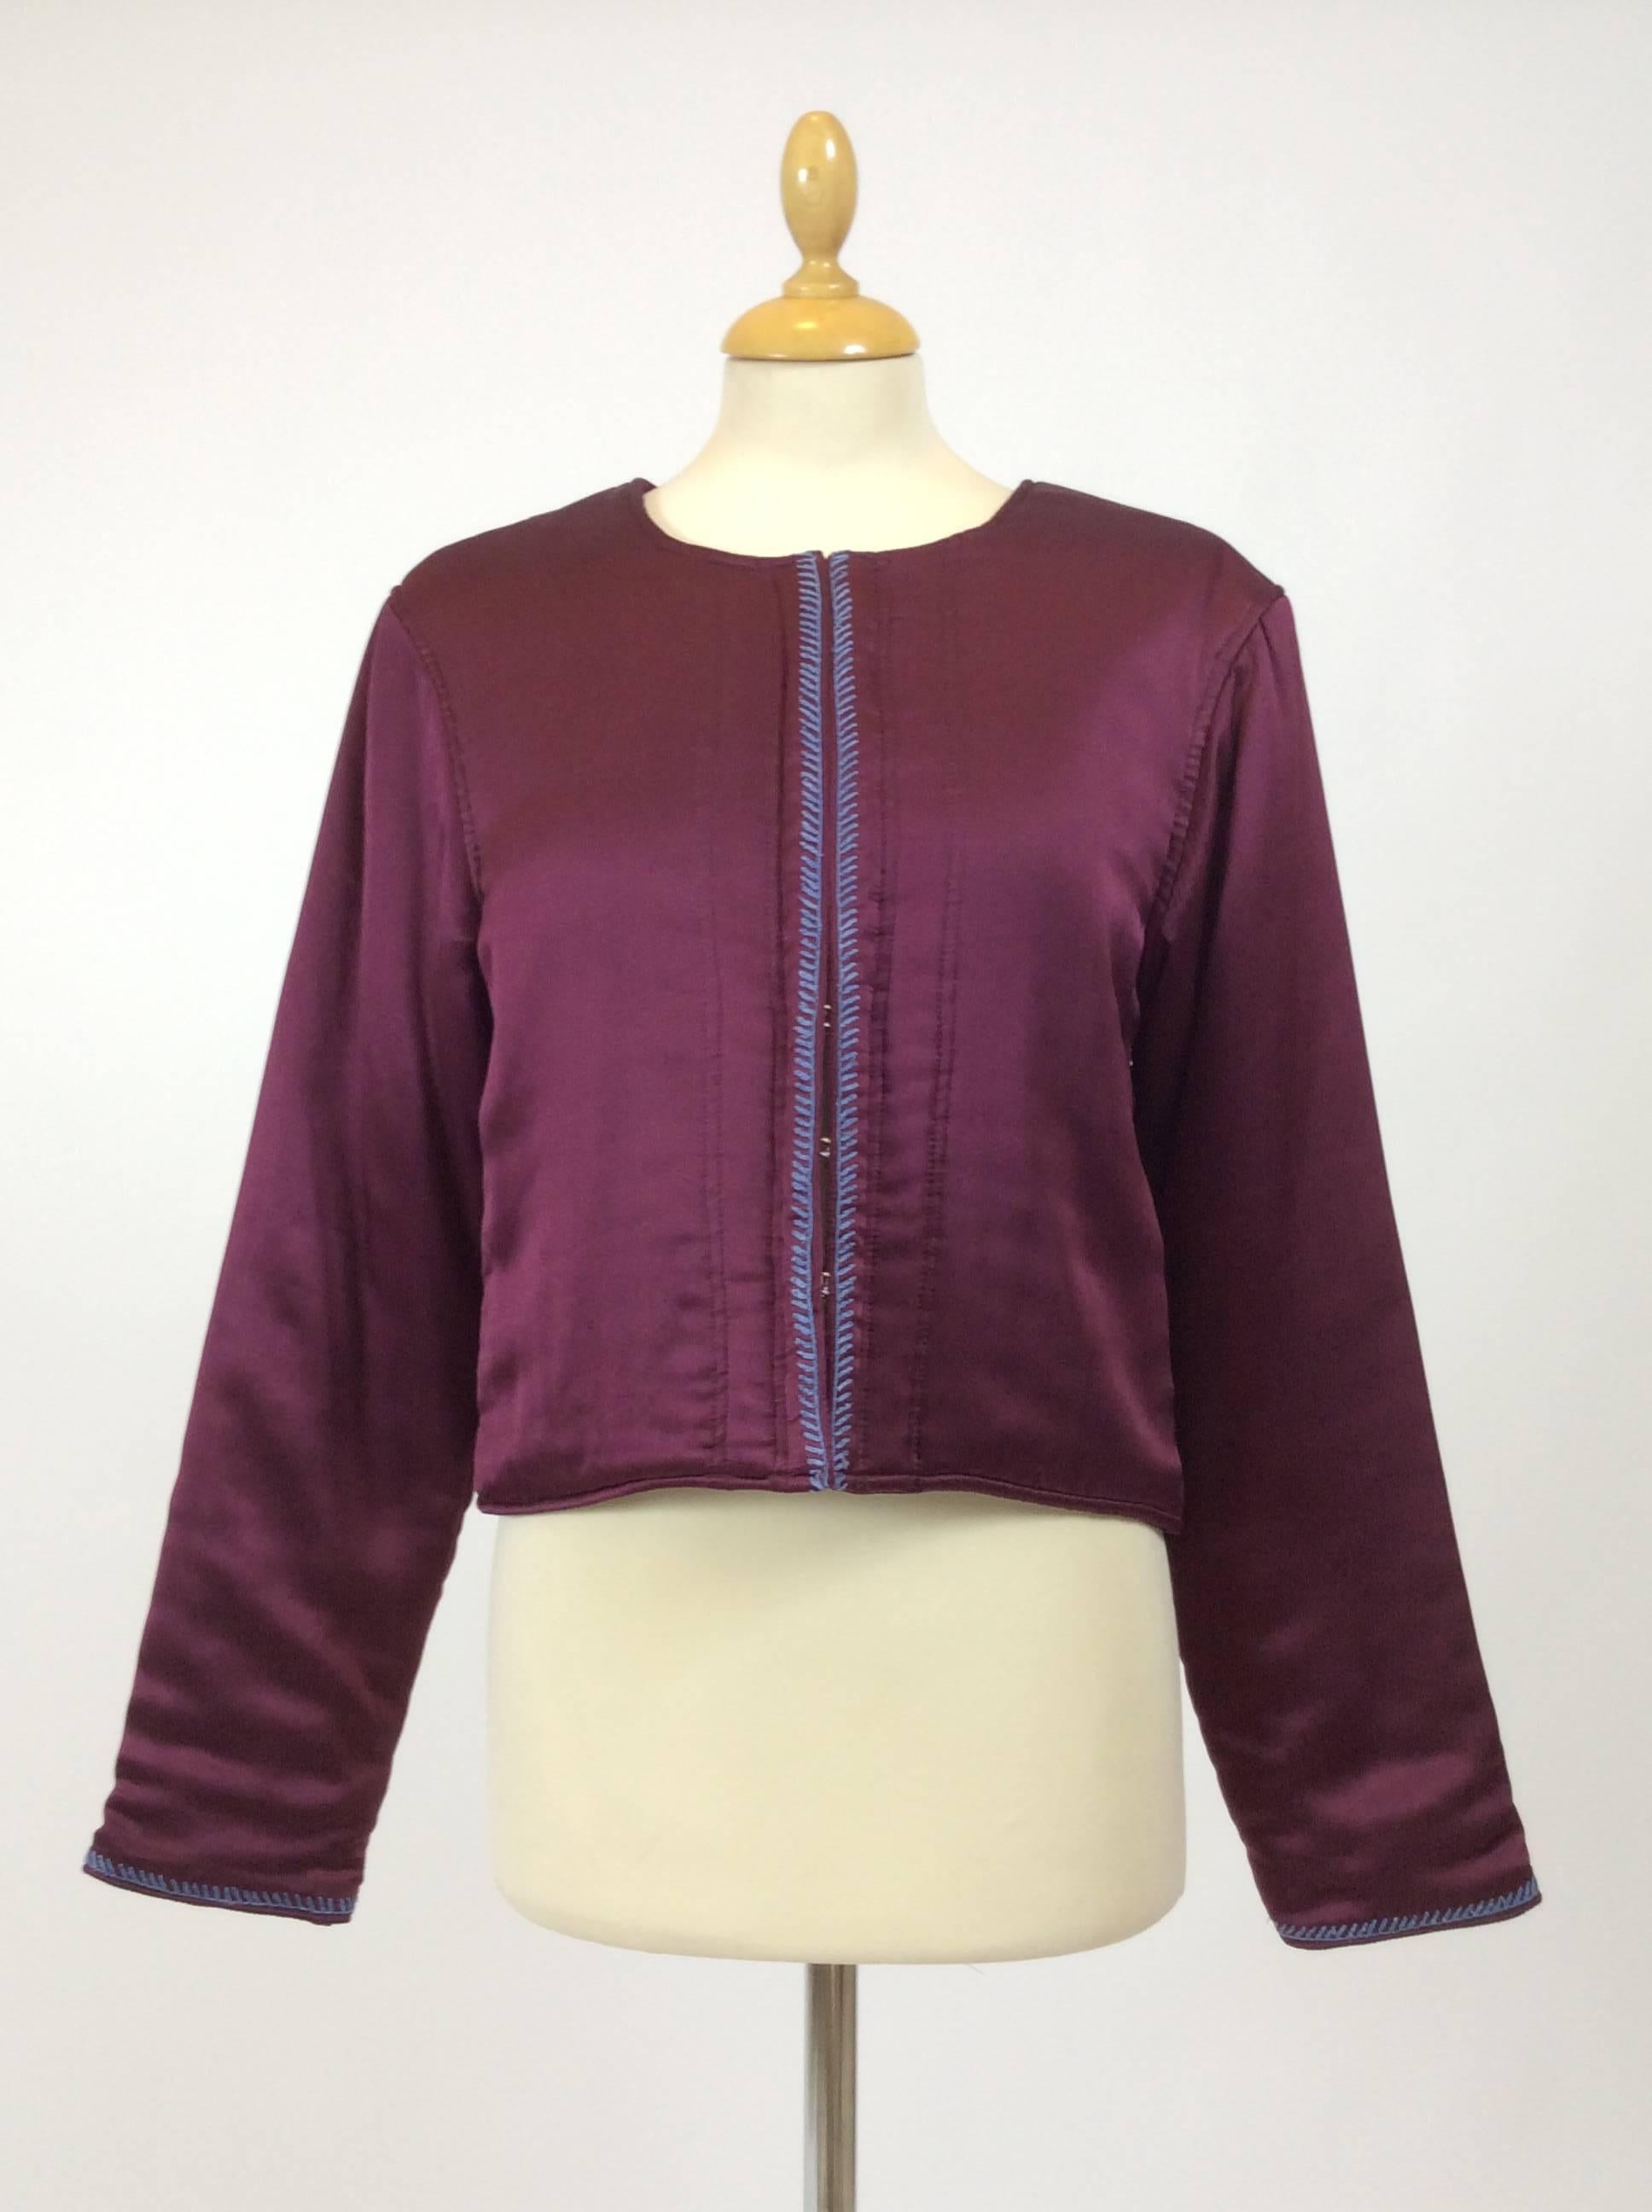 This stunning Lanvin Bolero jacket is made with burgundy red silk padded fabric.It has light blue stitch hem, hooks closure and fully lined.

Measurement:
Estimeted size S/M
Shoulder 16 inch
Sleeve 24 inch
Bust 34 inch
Total length 18 inch